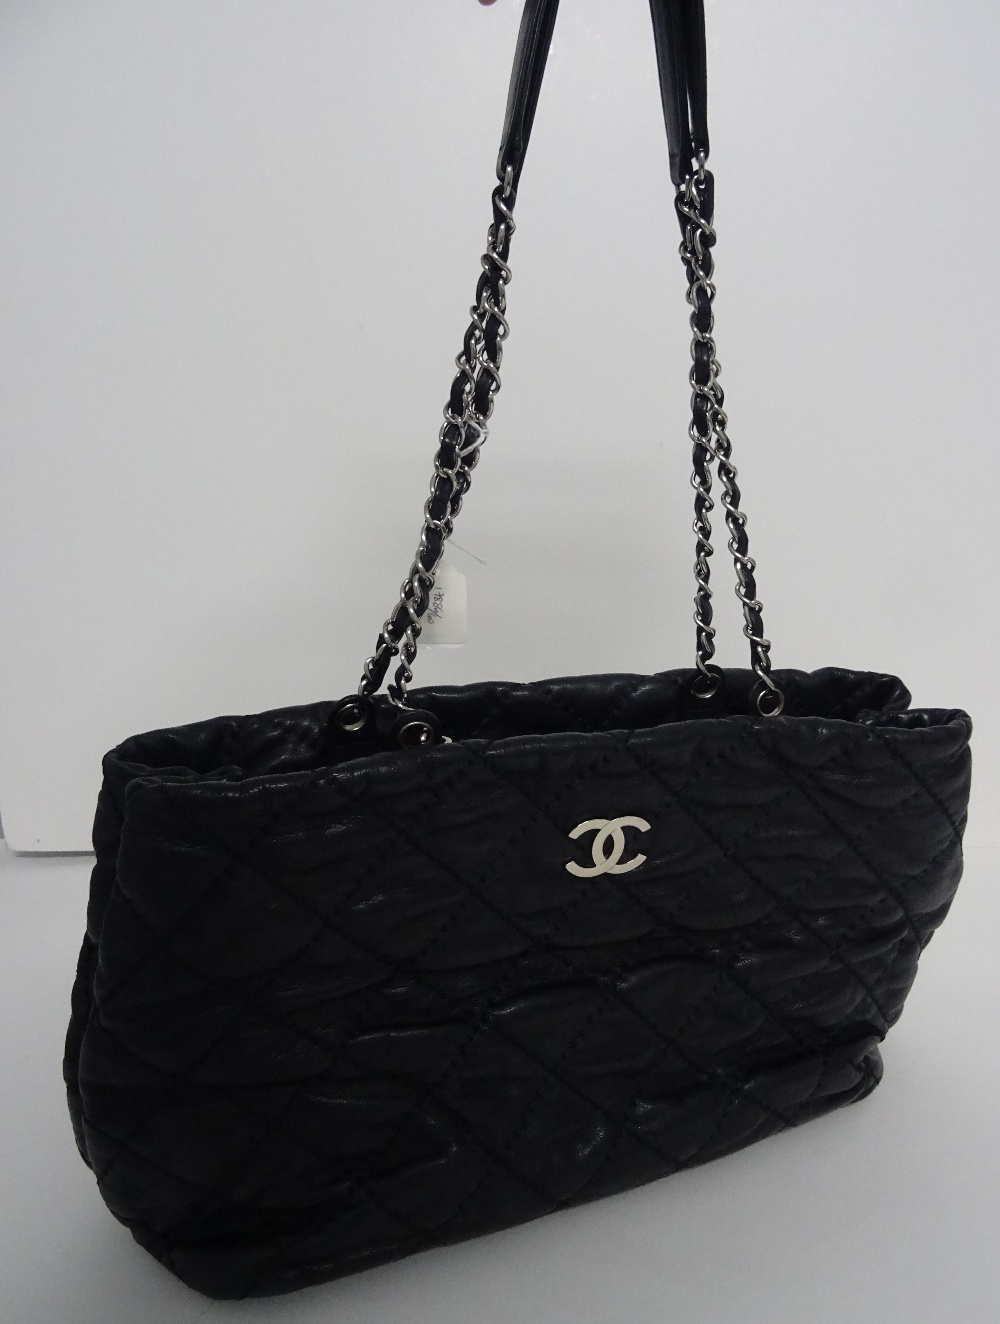 A Chanel black quilted leather tote bag, circa 2012-2013, with silver-tone hardware, - Image 5 of 13